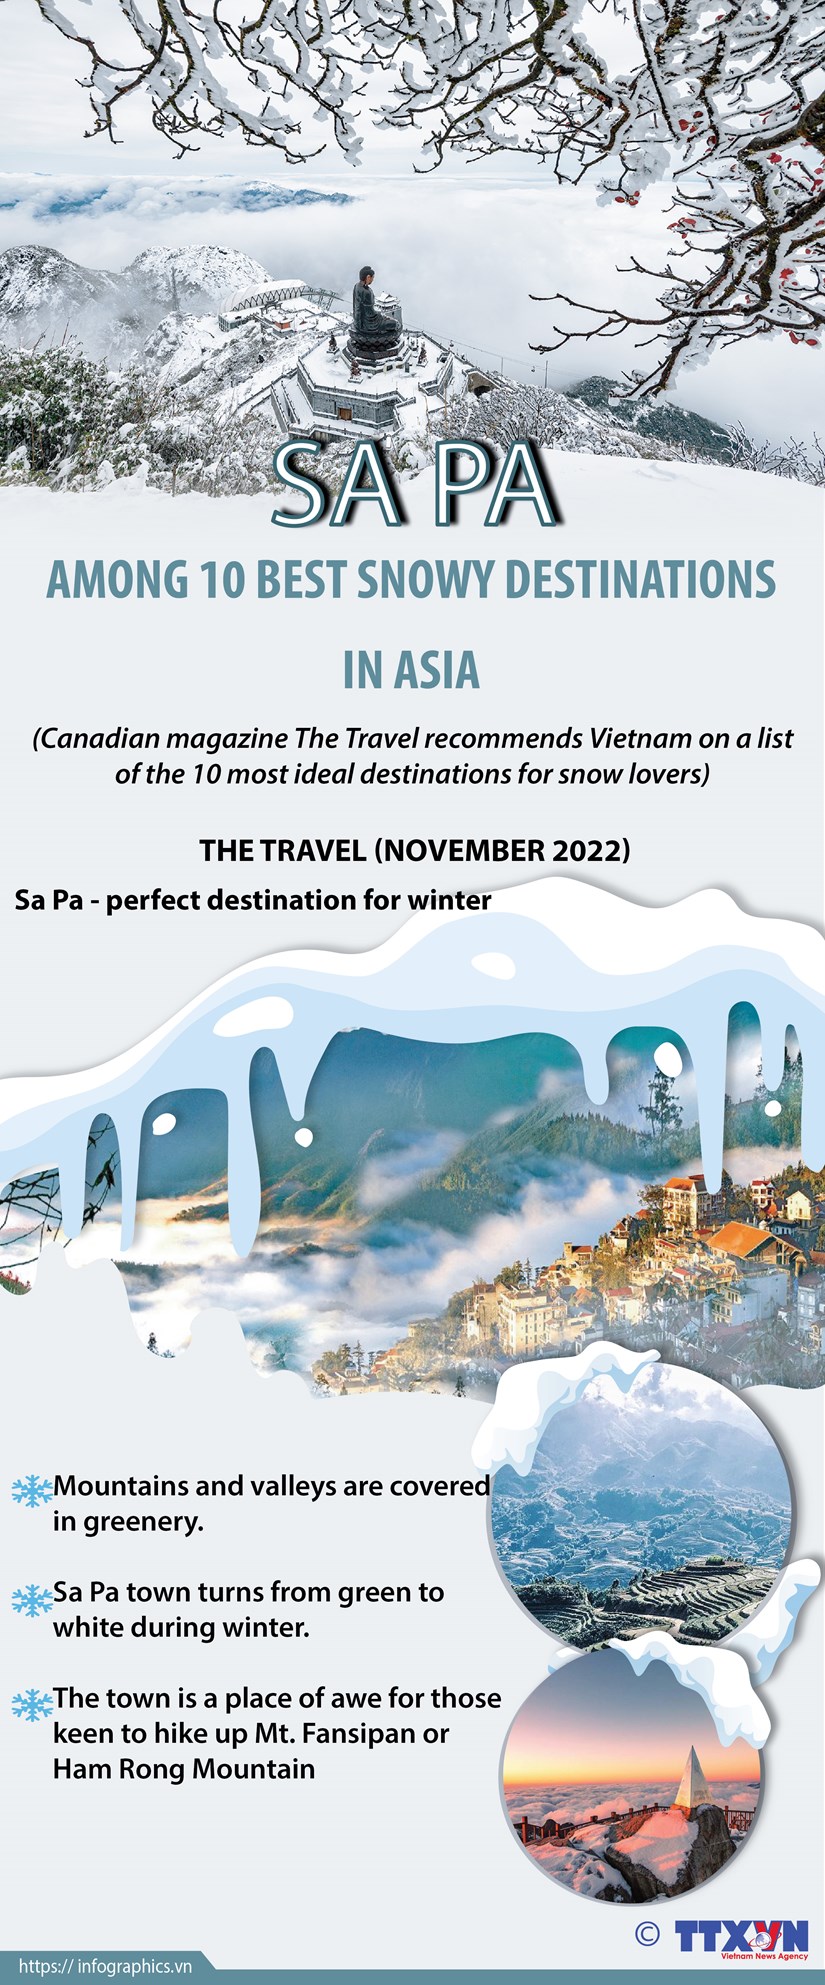 Sa Pa among 10 best snowy destinations in Asia hinh anh 1